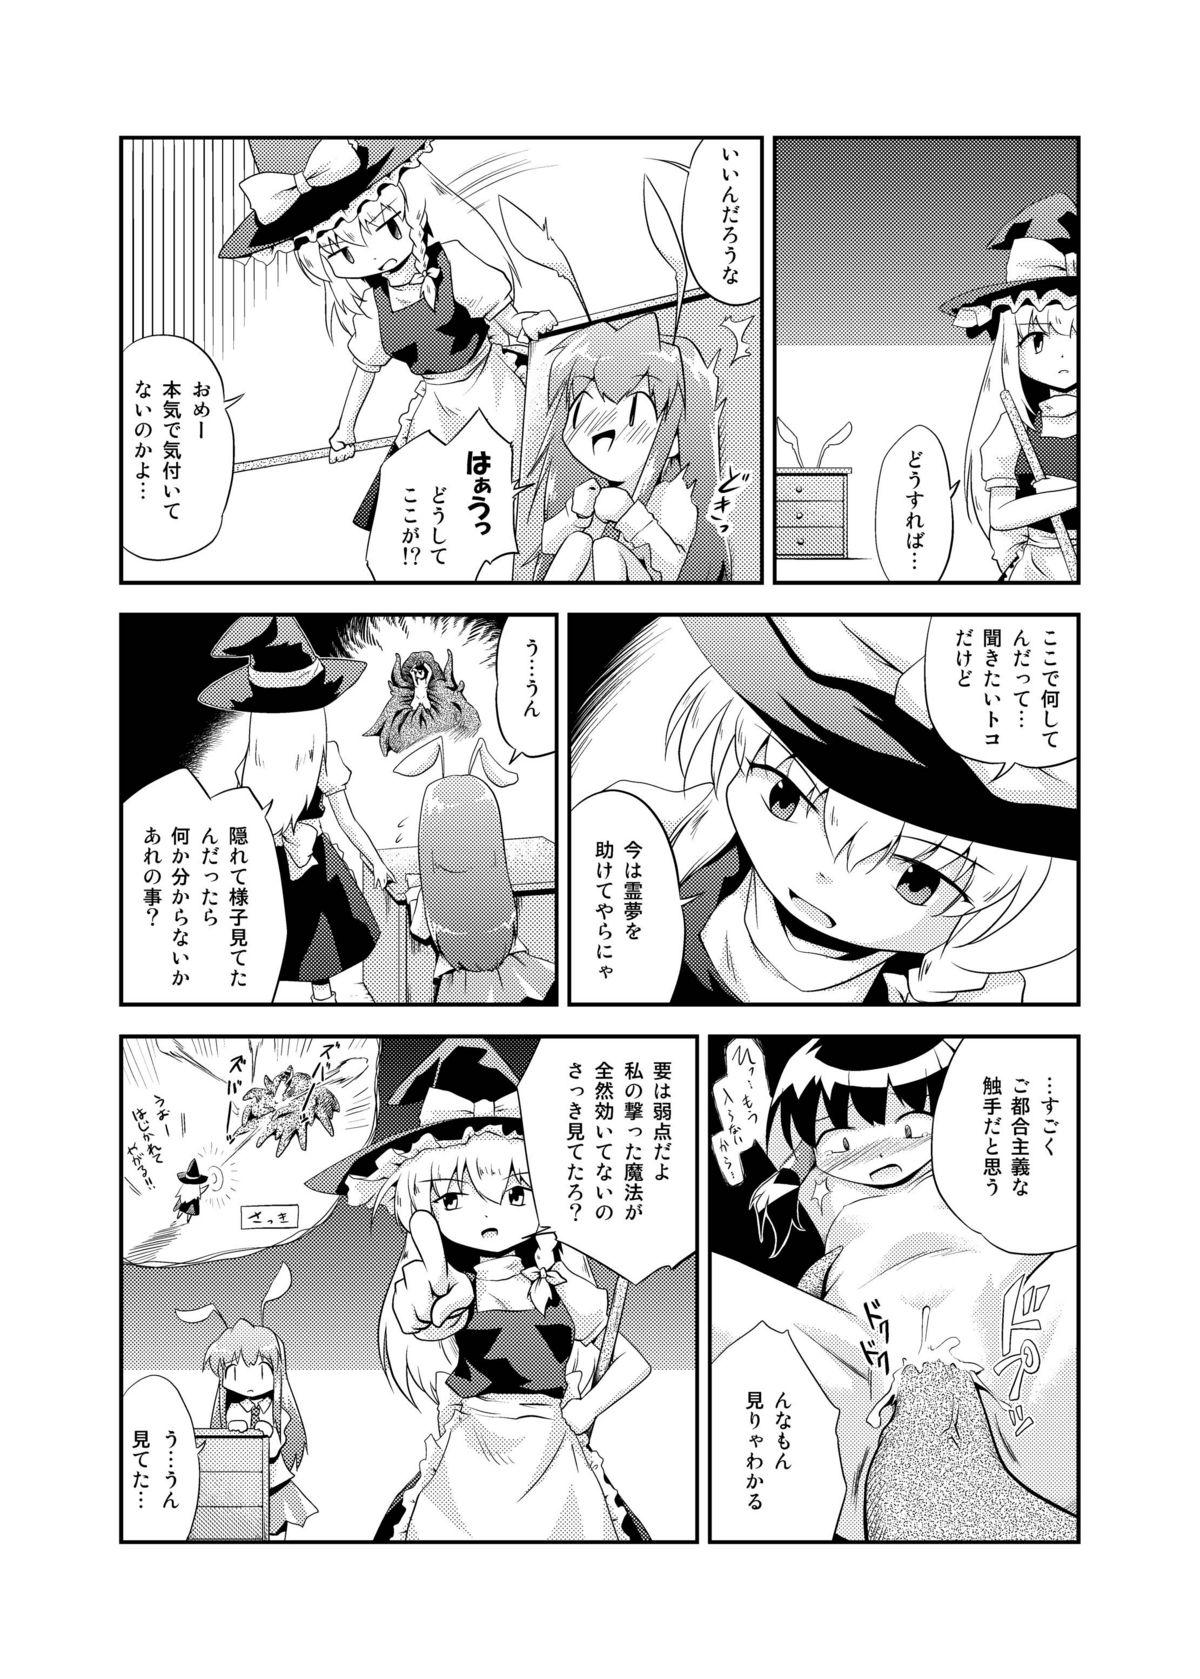 Hot Girls Getting Fucked DISARM CLOTHES - Touhou project Selfie - Page 4